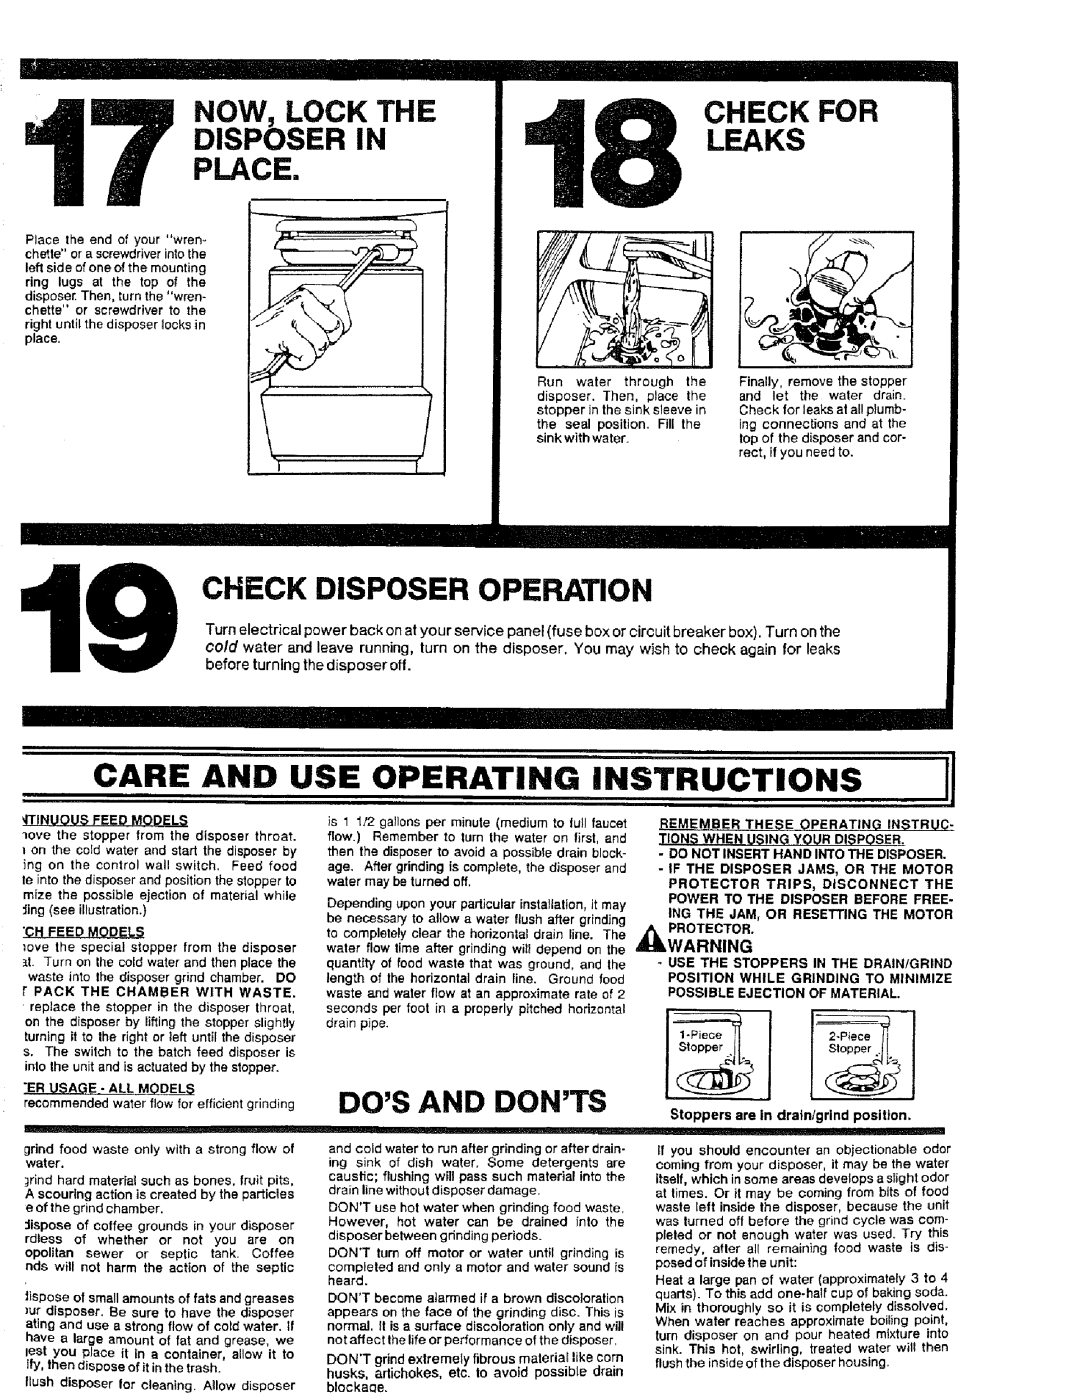 Kenmore 17568563 Check Disposer Operation, Care And Use Operating Instructions, DISPOSER IN 7 PLACENOW, .LOCKTHE, Leaks 